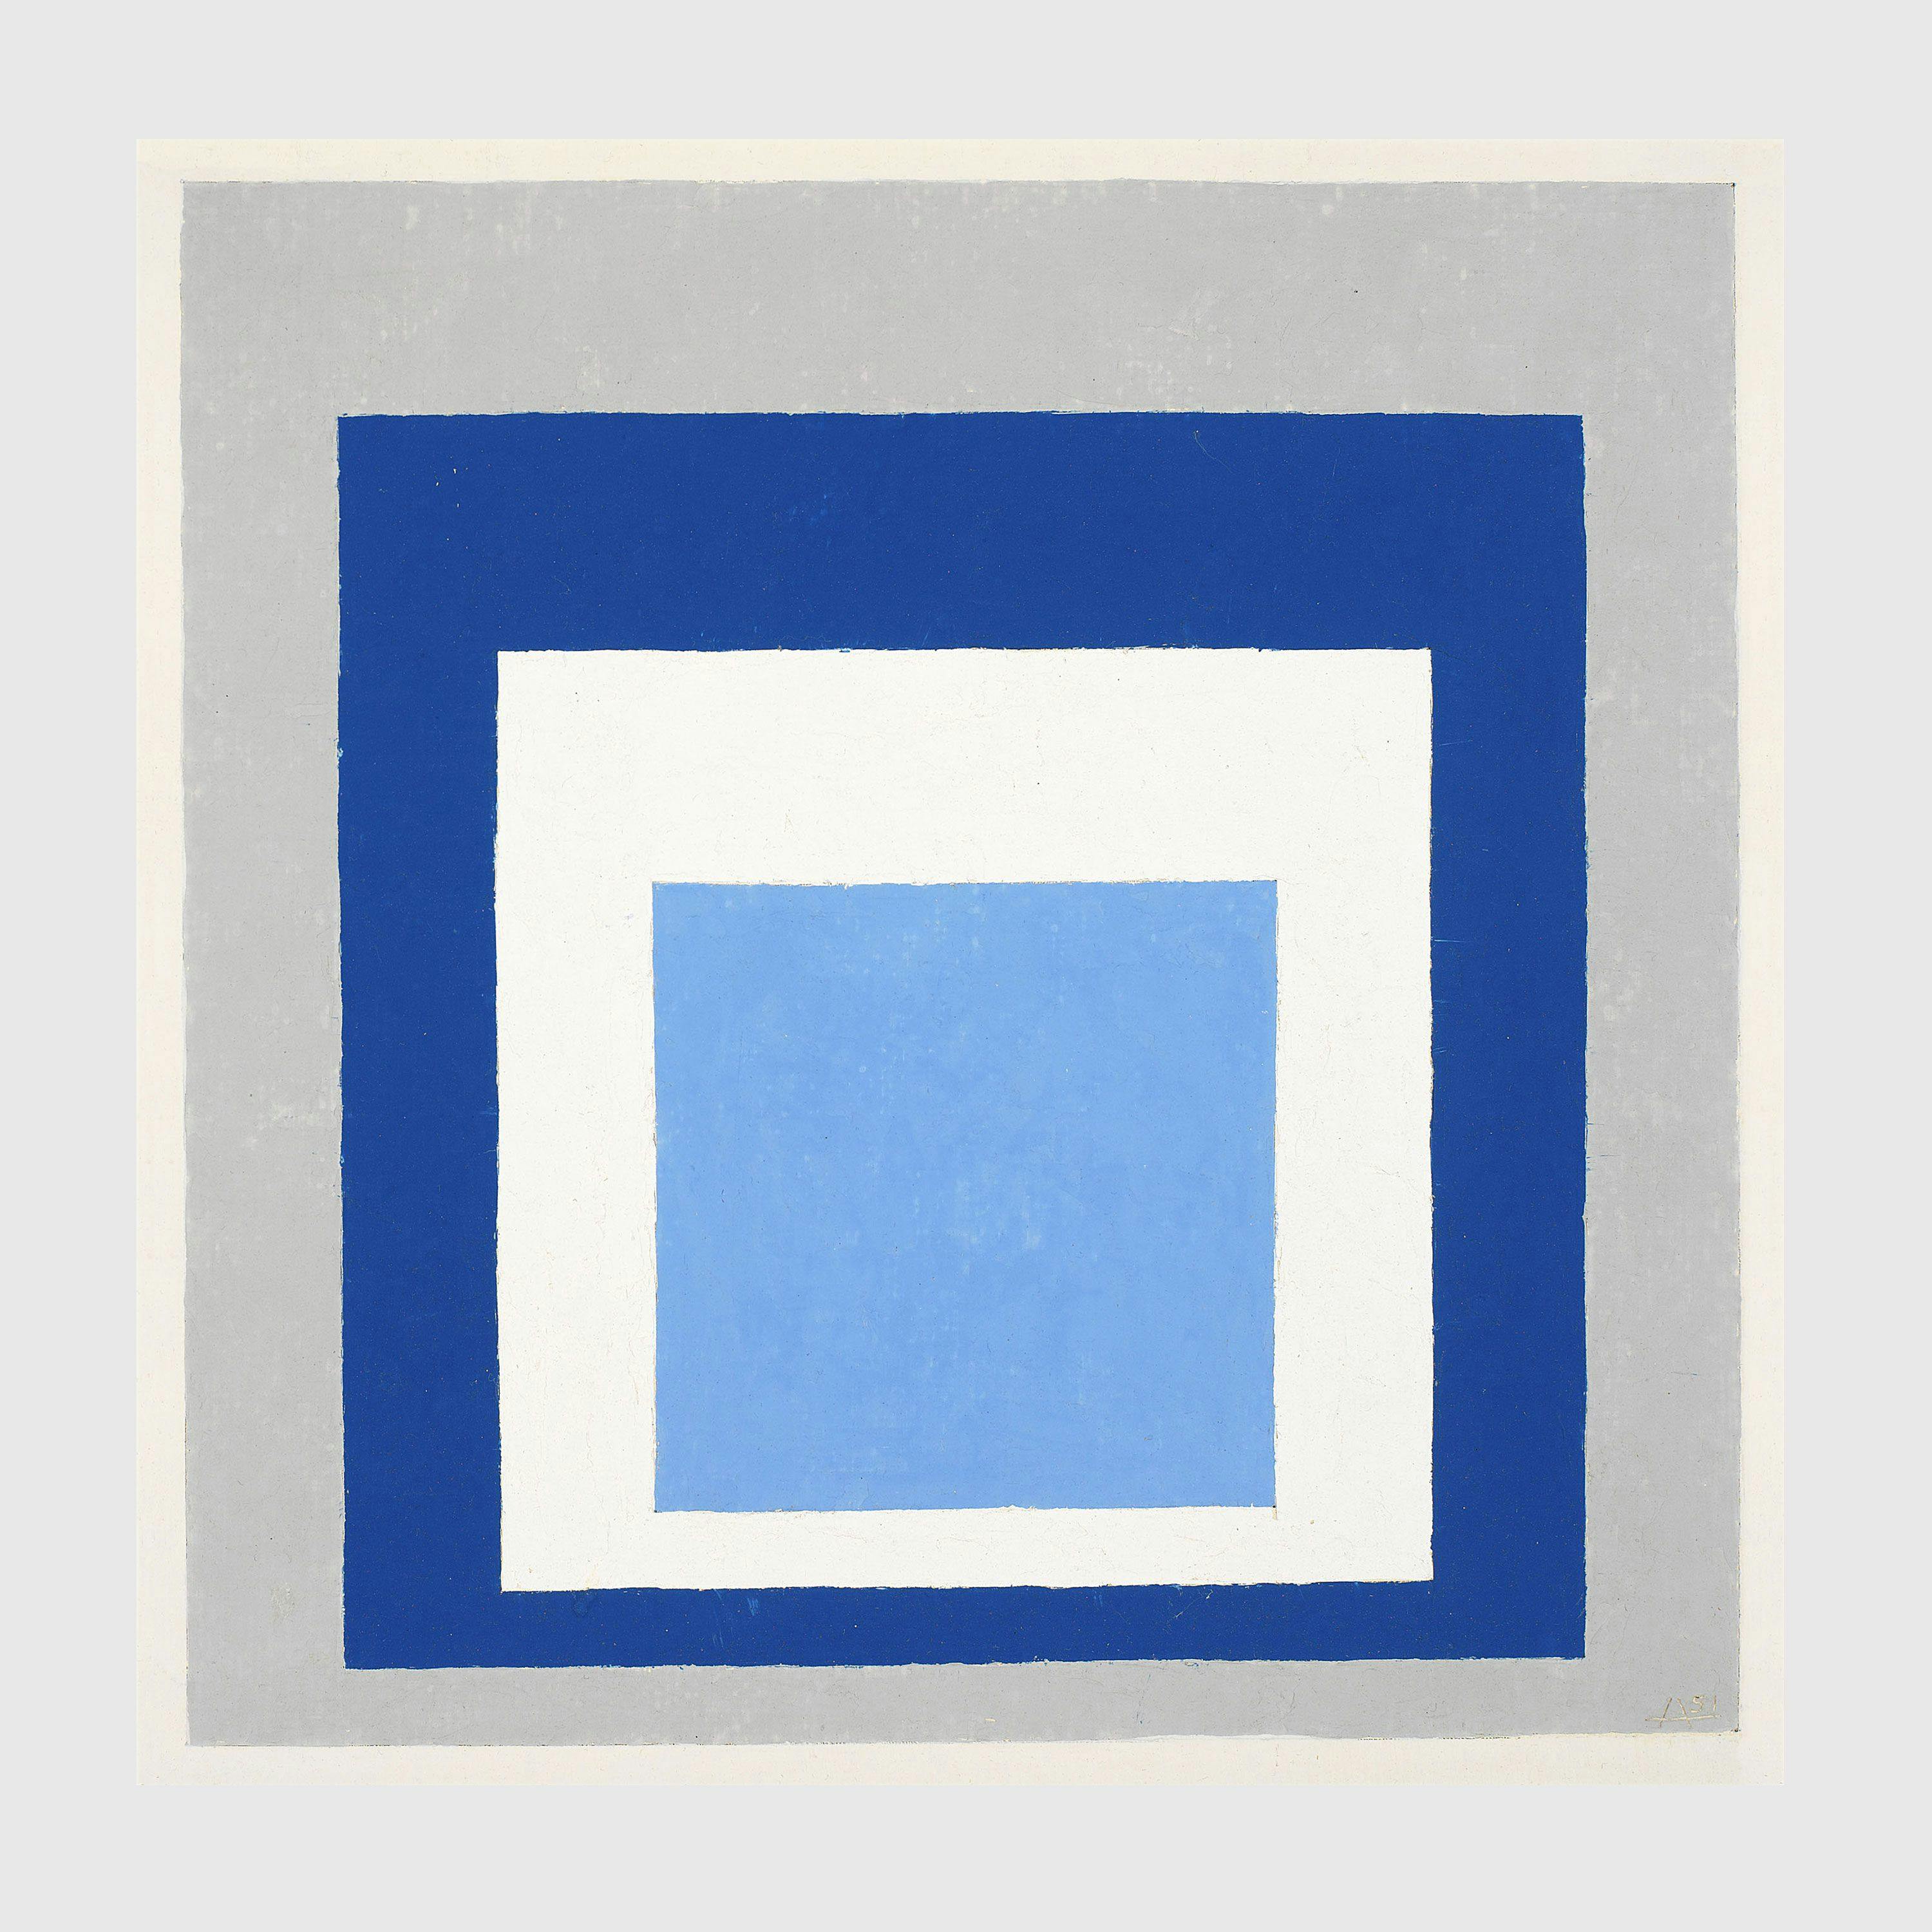 A painting by Josef Albers, titled Homage to the Square, dated 1951.